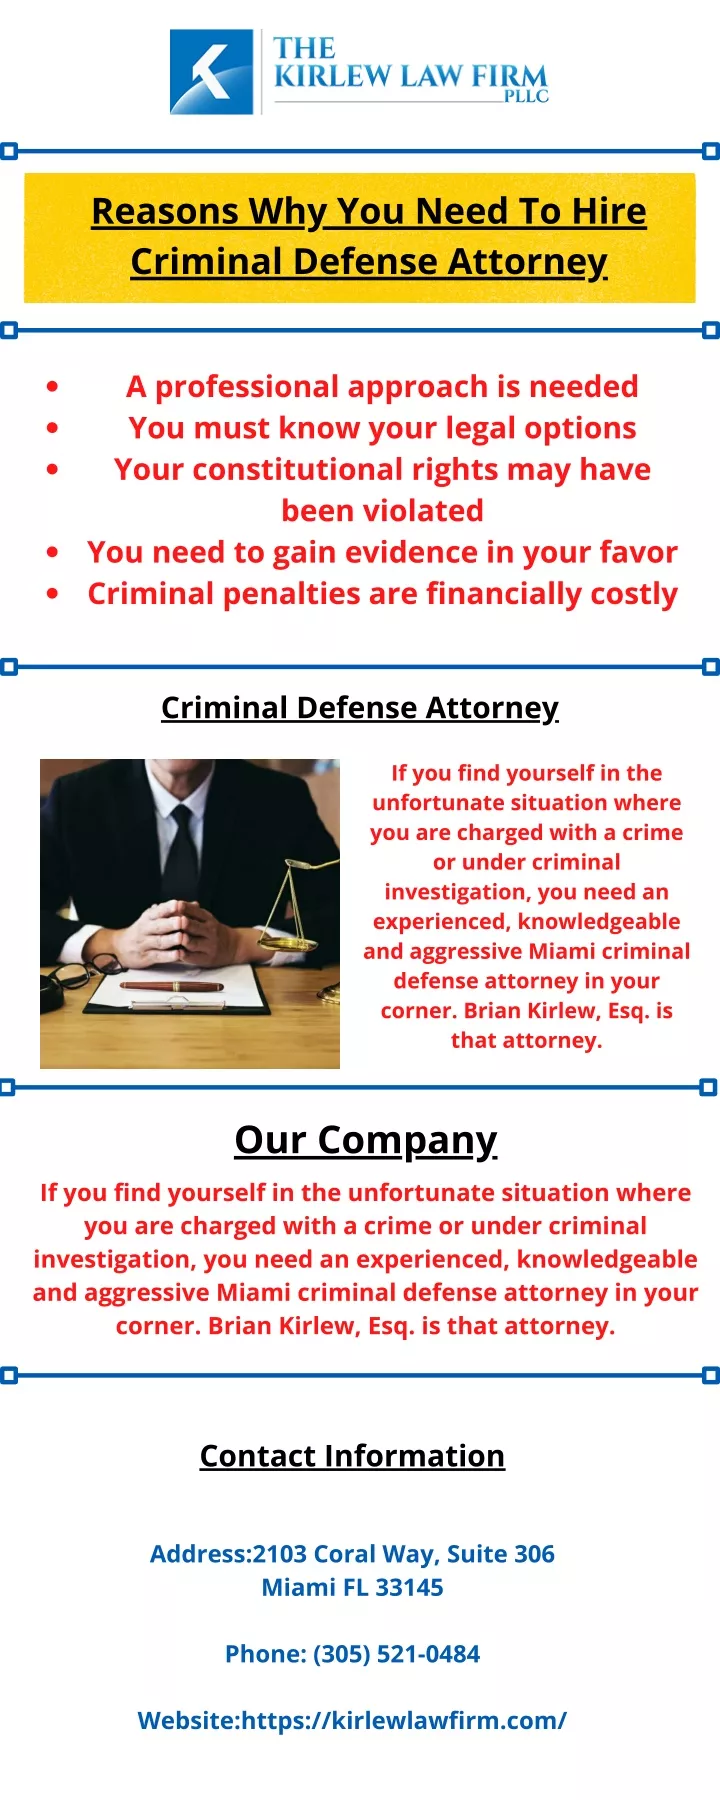 Ppt Reasons Why You Need To Hire Criminal Defense Attorney Powerpoint Presentation Id11356843 3474